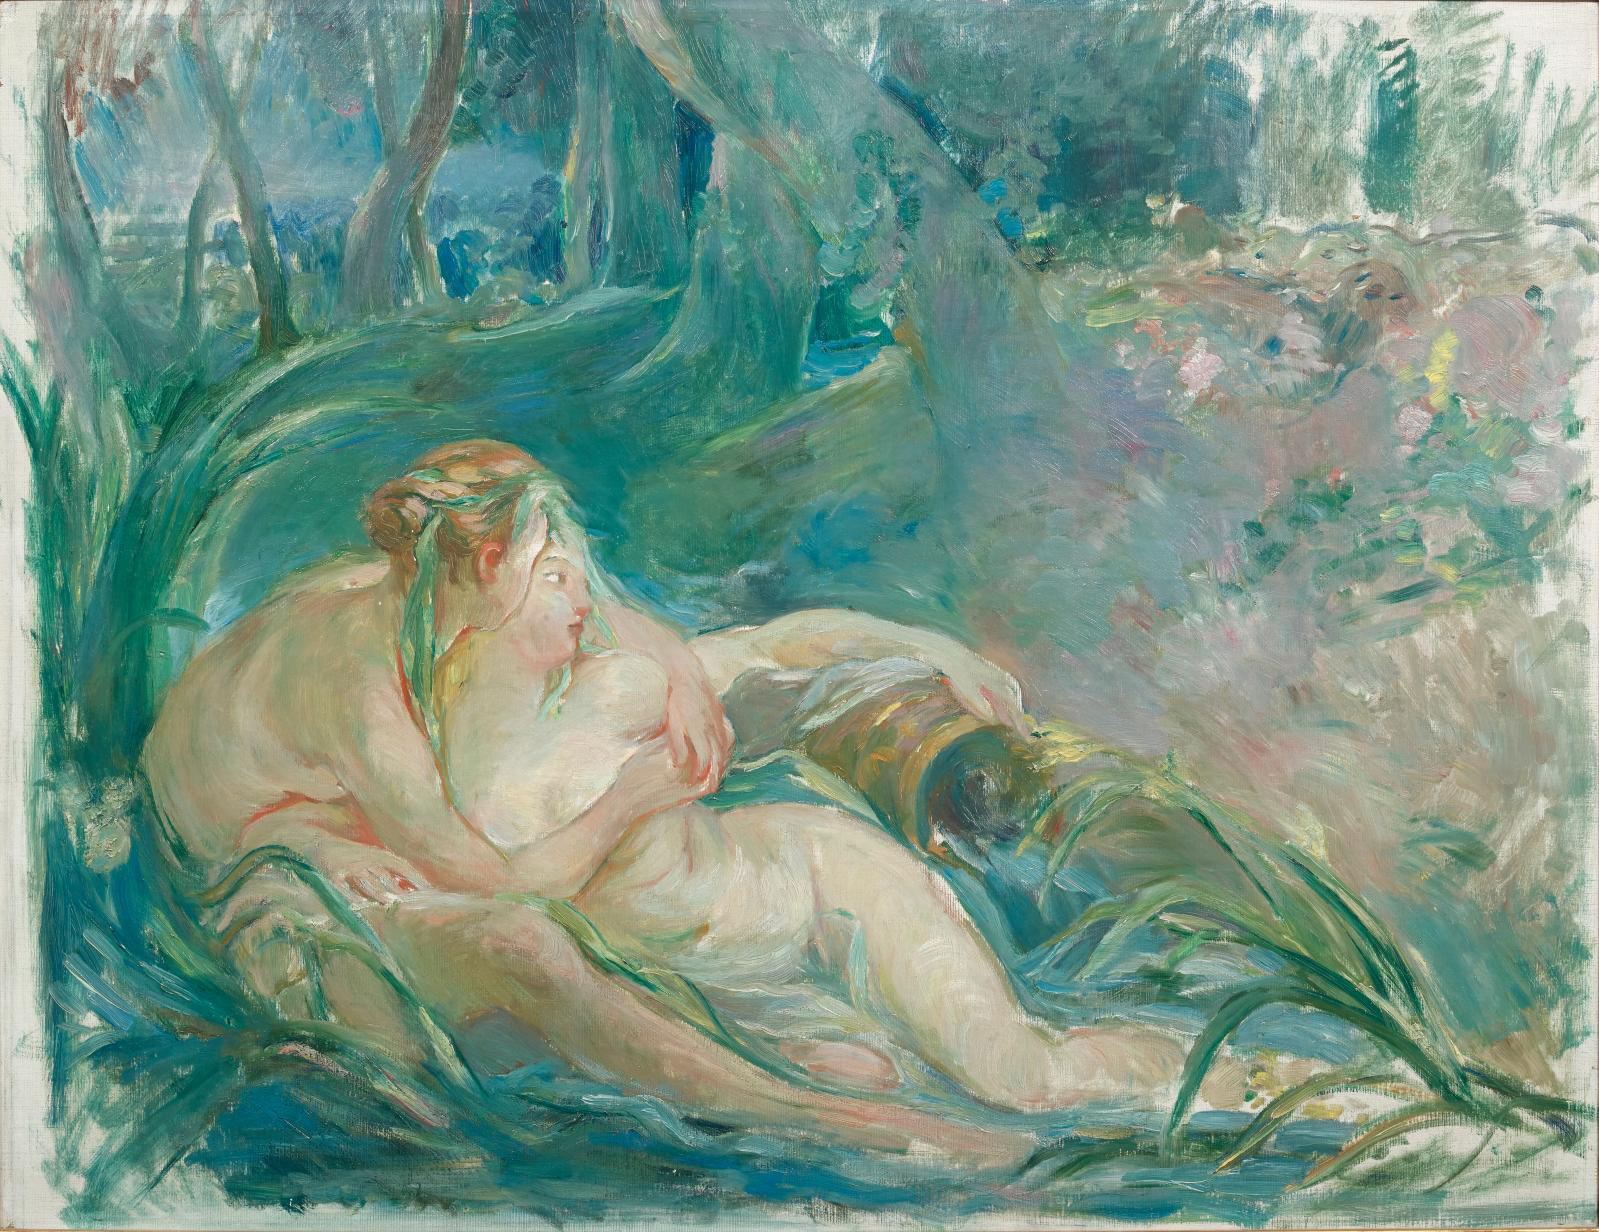 Berthe Morisot and the 18th Century at the Musée Marmottan